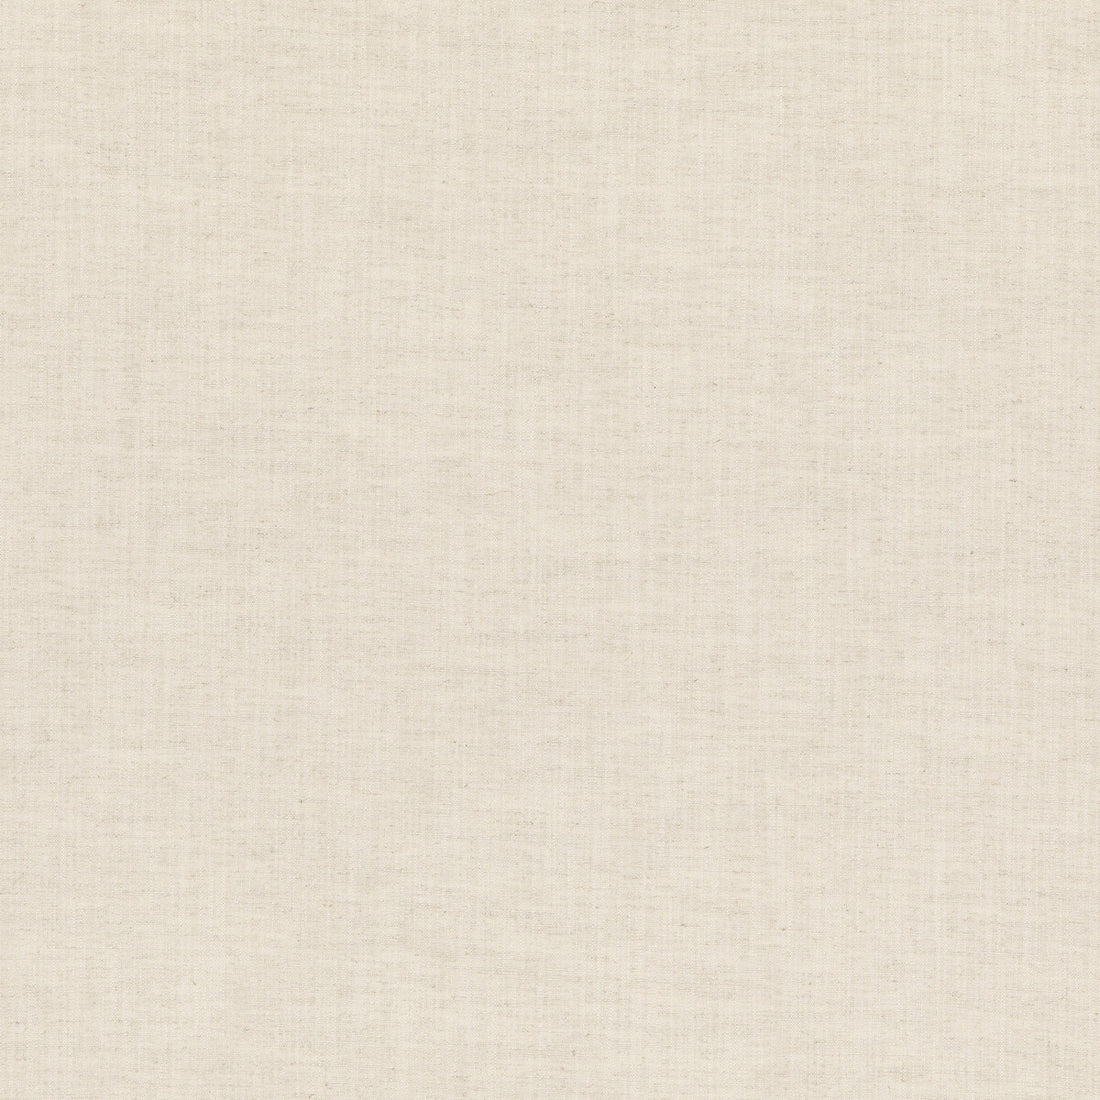 Omega fabric in parchment color - pattern ED85380.225.0 - by Threads in the Quintessential Textures collection